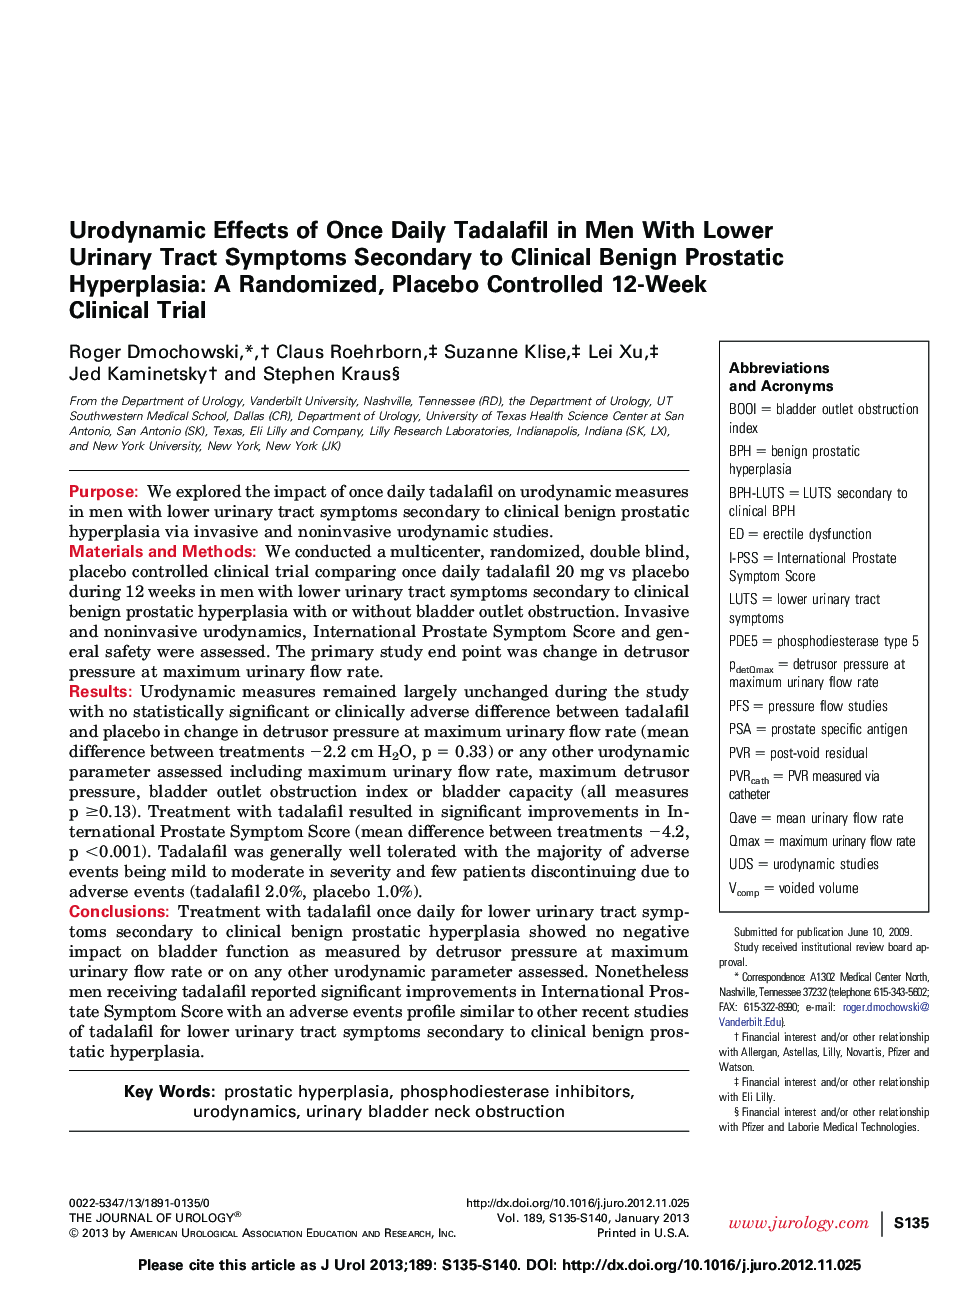 Urodynamic Effects of Once Daily Tadalafil in Men With Lower Urinary Tract Symptoms Secondary to Clinical Benign Prostatic Hyperplasia: A Randomized, Placebo Controlled 12-Week Clinical Trial